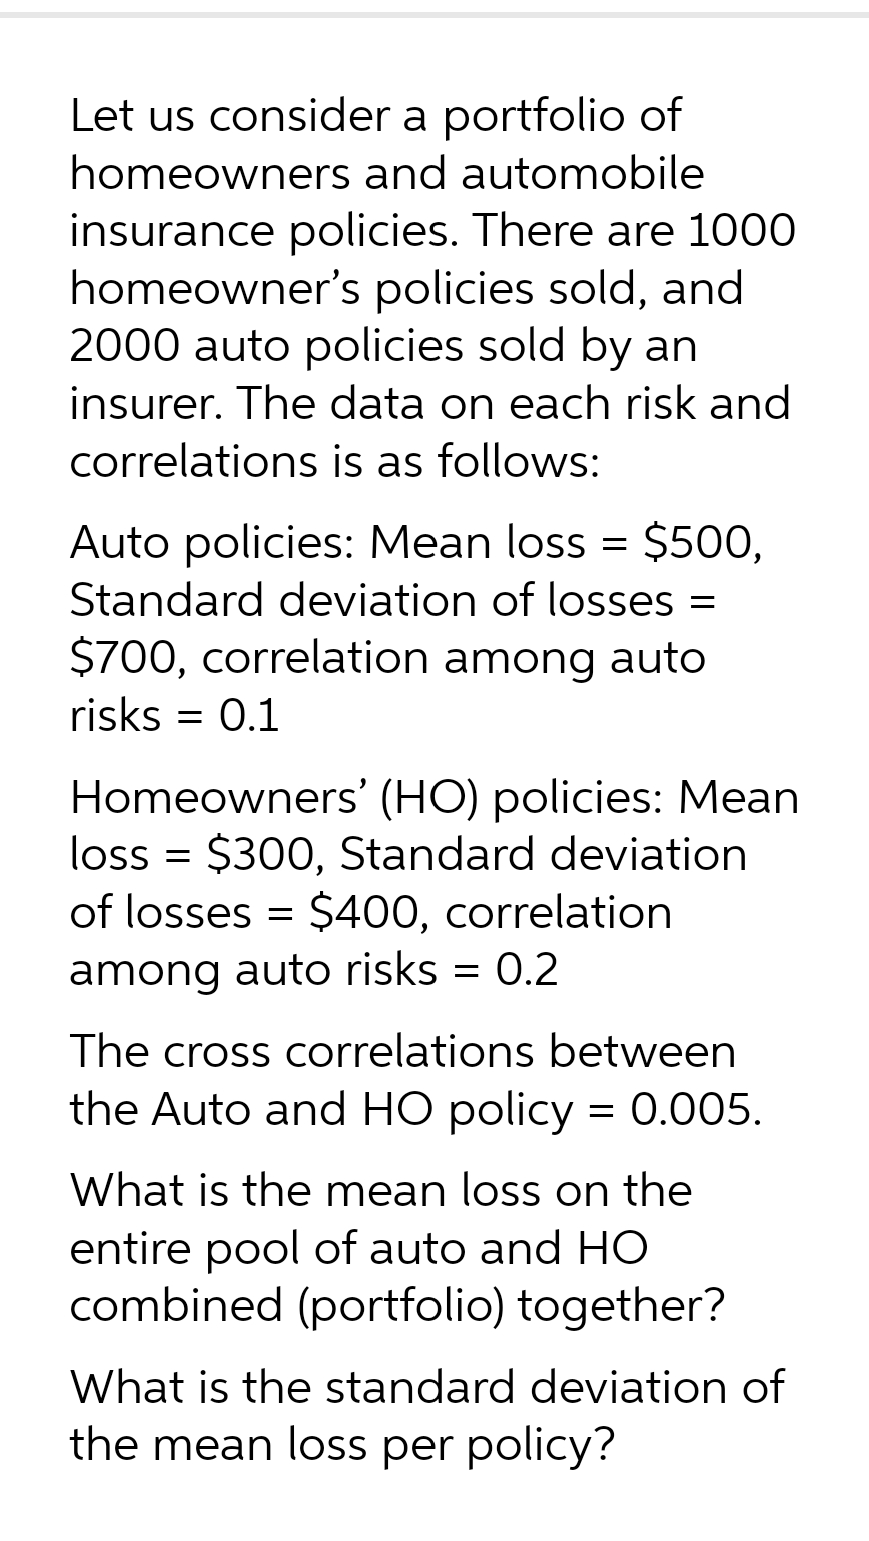 Let us consider a portfolio of
homeowners and automobile
insurance policies. There are 1000
homeowner's policies sold, and
2000 auto policies sold by an
insurer. The data on each risk and
correlations is as follows:
Auto policies: Mean loss = $500,
Standard deviation of losses =
$700, correlation among auto
risks = 0.1
Homeowners' (HO) policies: Mean
loss = $300, Standard deviation
of losses = $400, correlation
among auto risks = 0.2
The cross correlations between
the Auto and HO policy = 0.005.
What is the mean loss on the
entire pool of auto and HO
combined (portfolio) together?
What is the standard deviation of
the mean loss per policy?